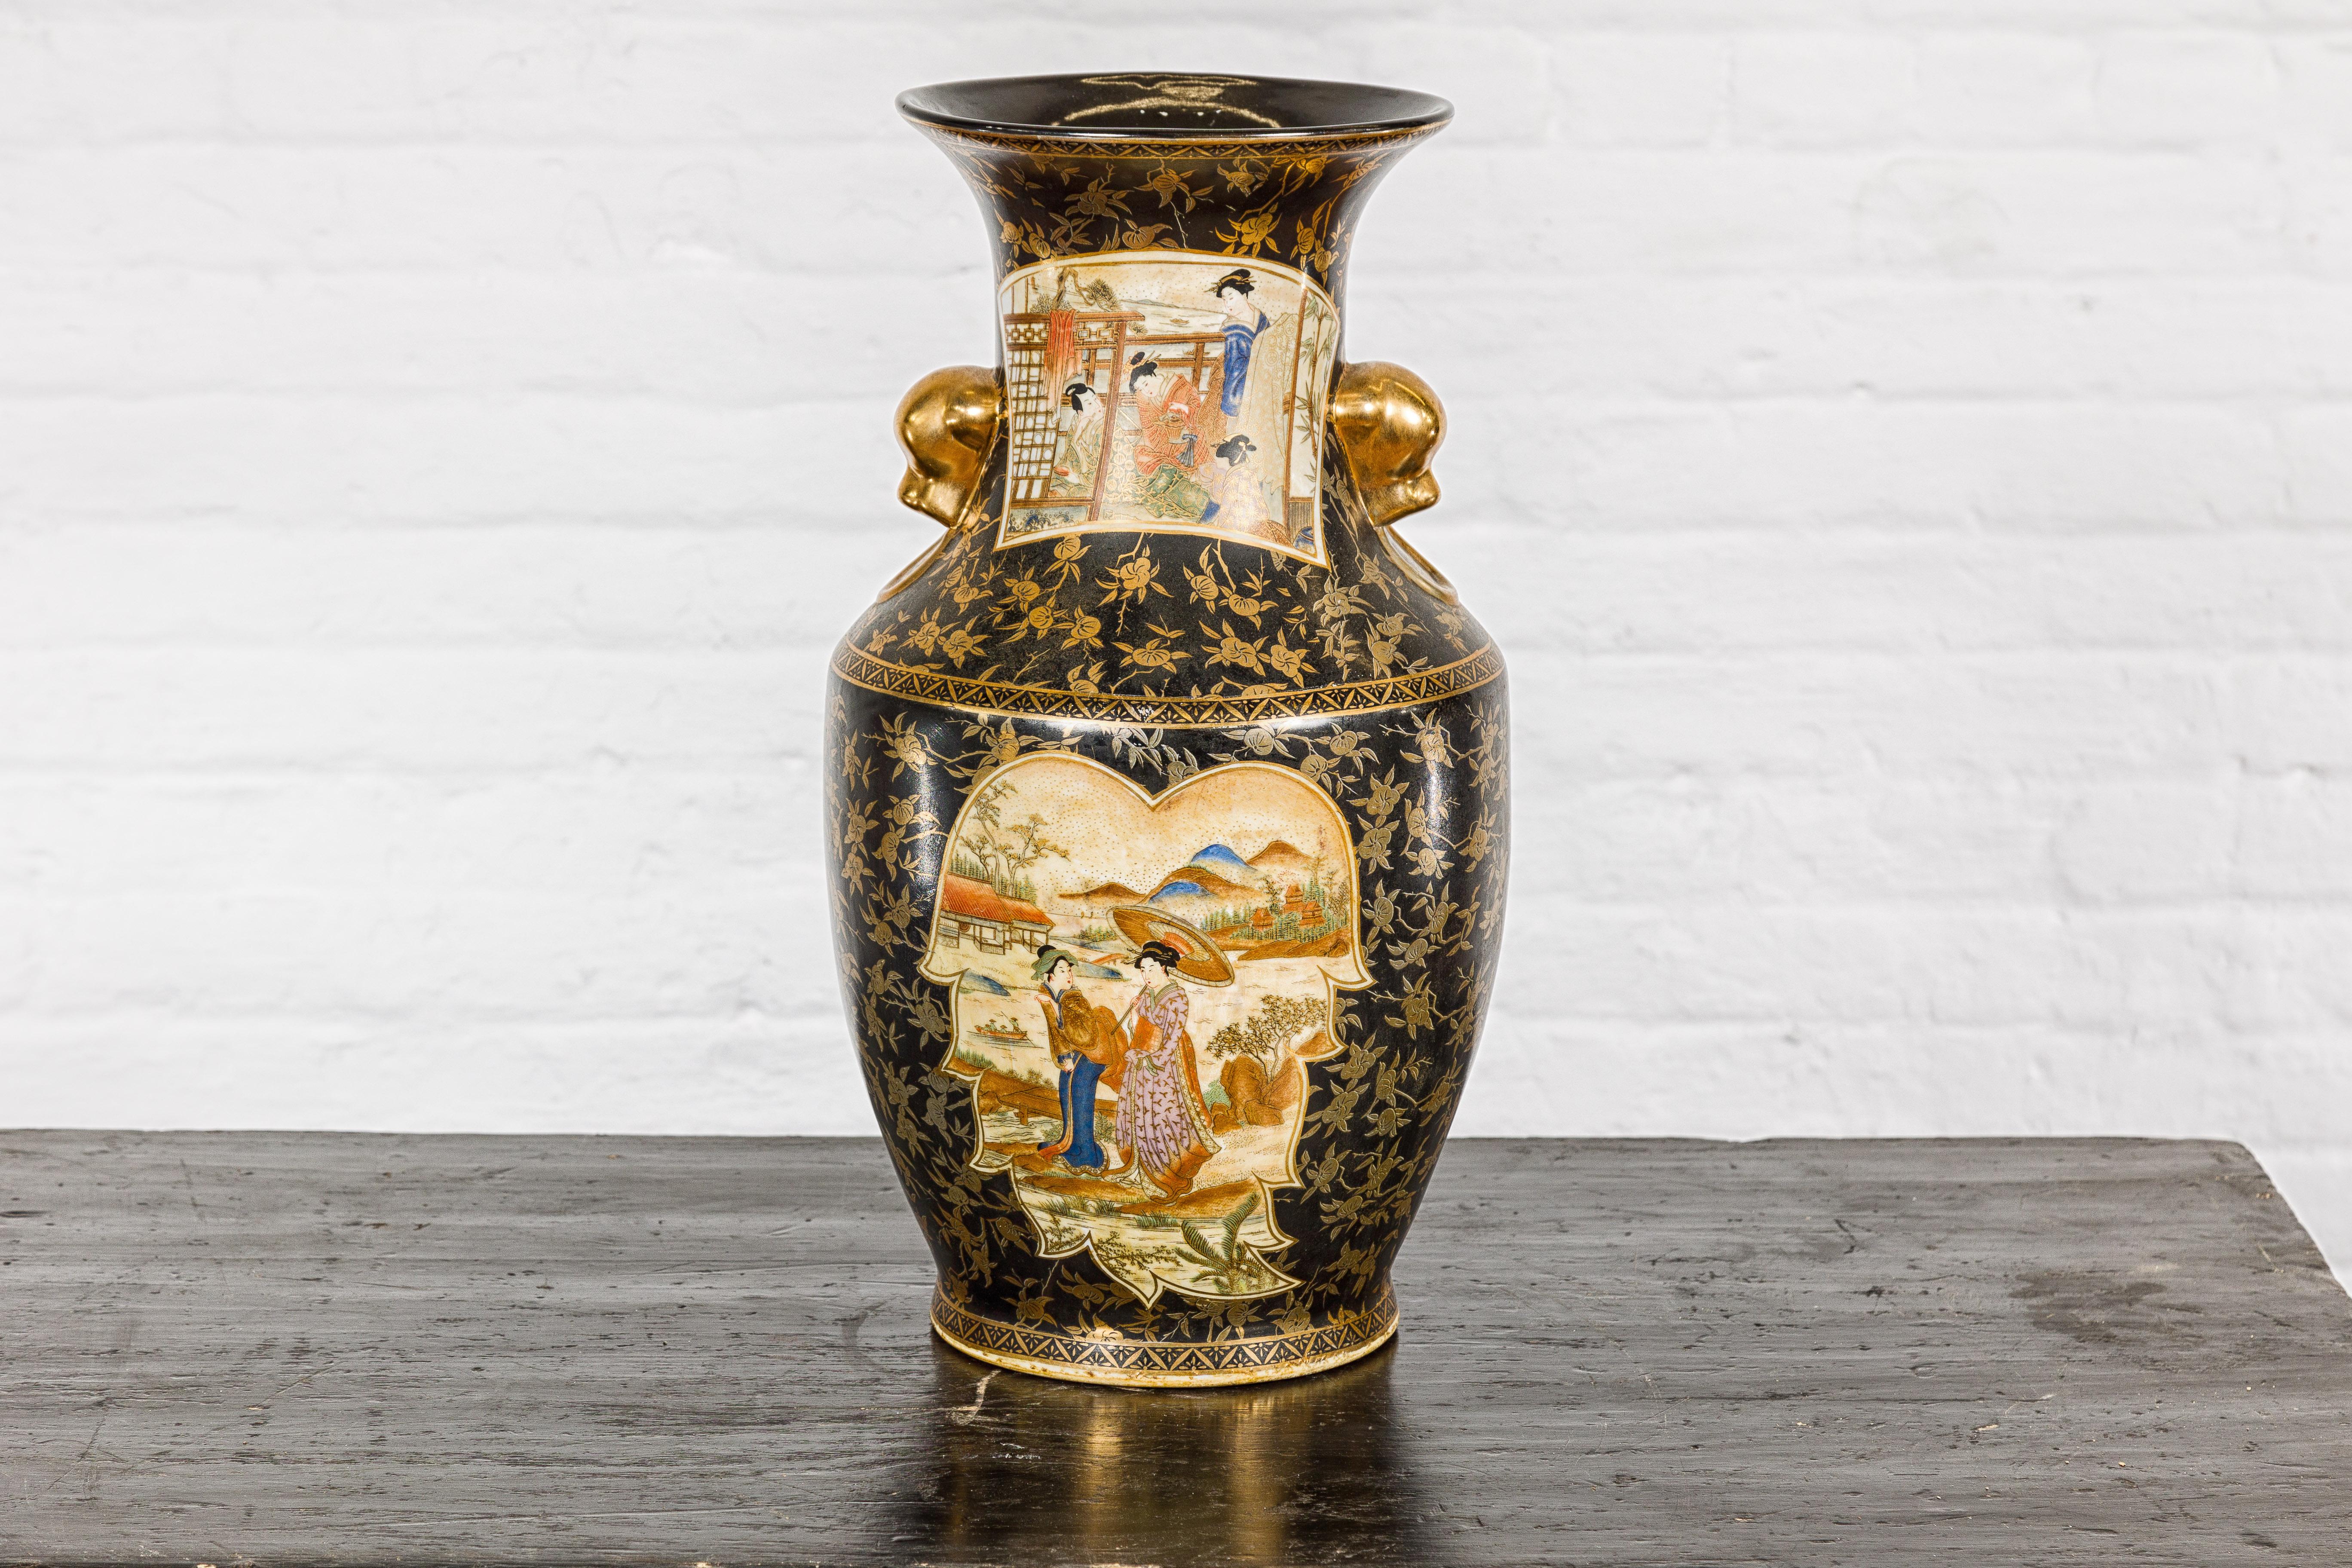 Japanese Inspired Black and Gold Vase with Family Scenes and Foo Dog Handles For Sale 6